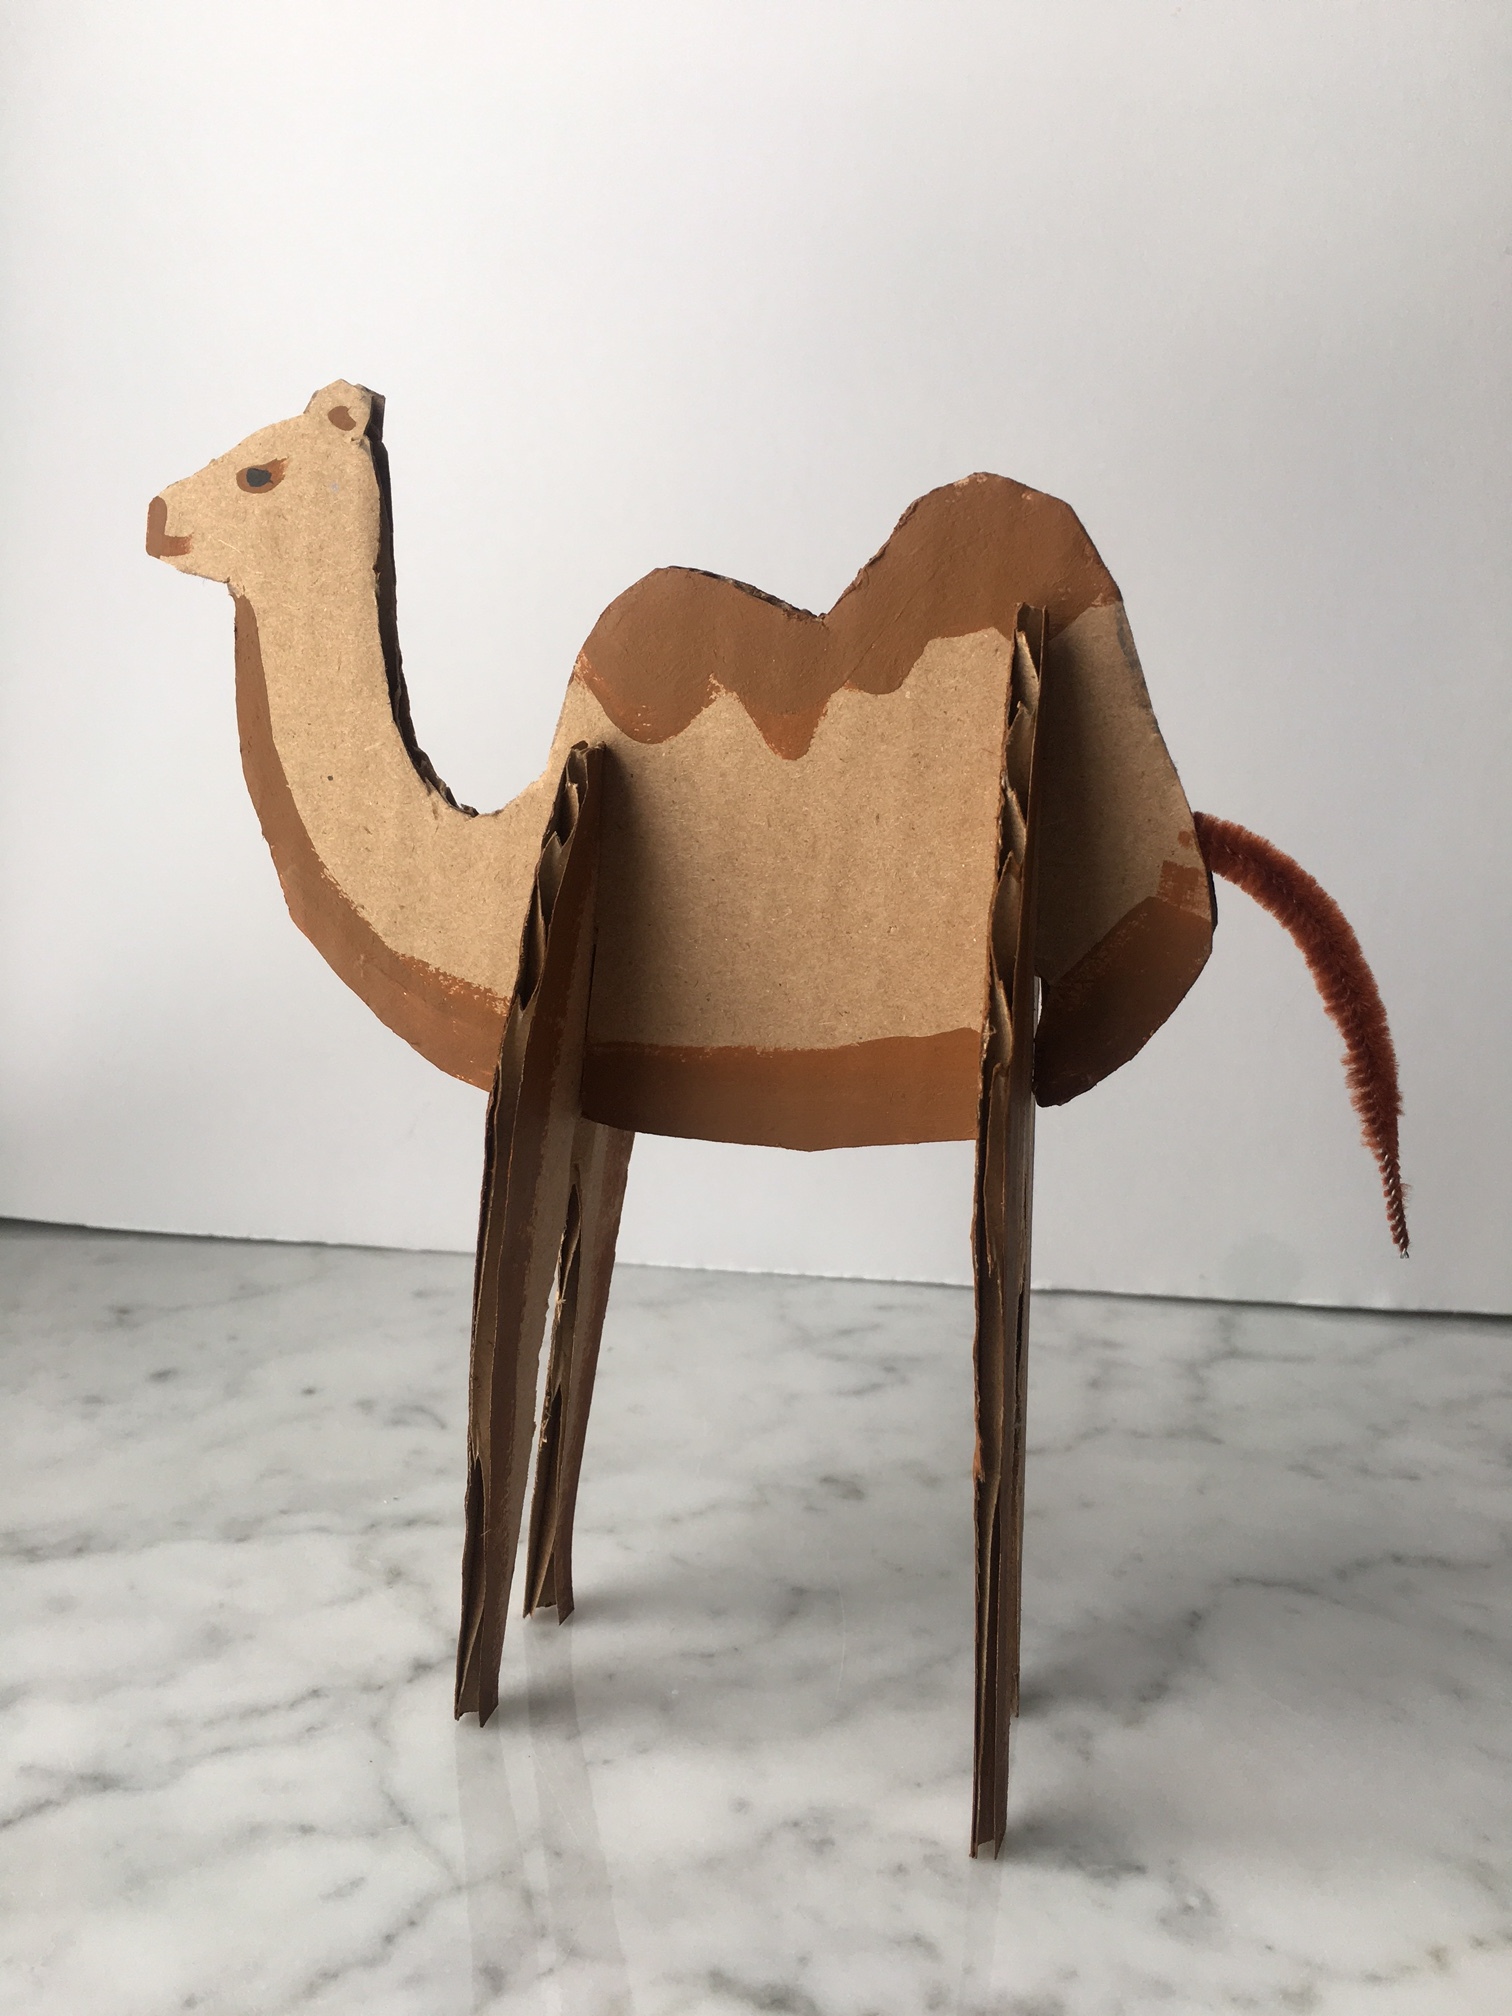 recycled-cardboard-zoo-animals-super-make-it